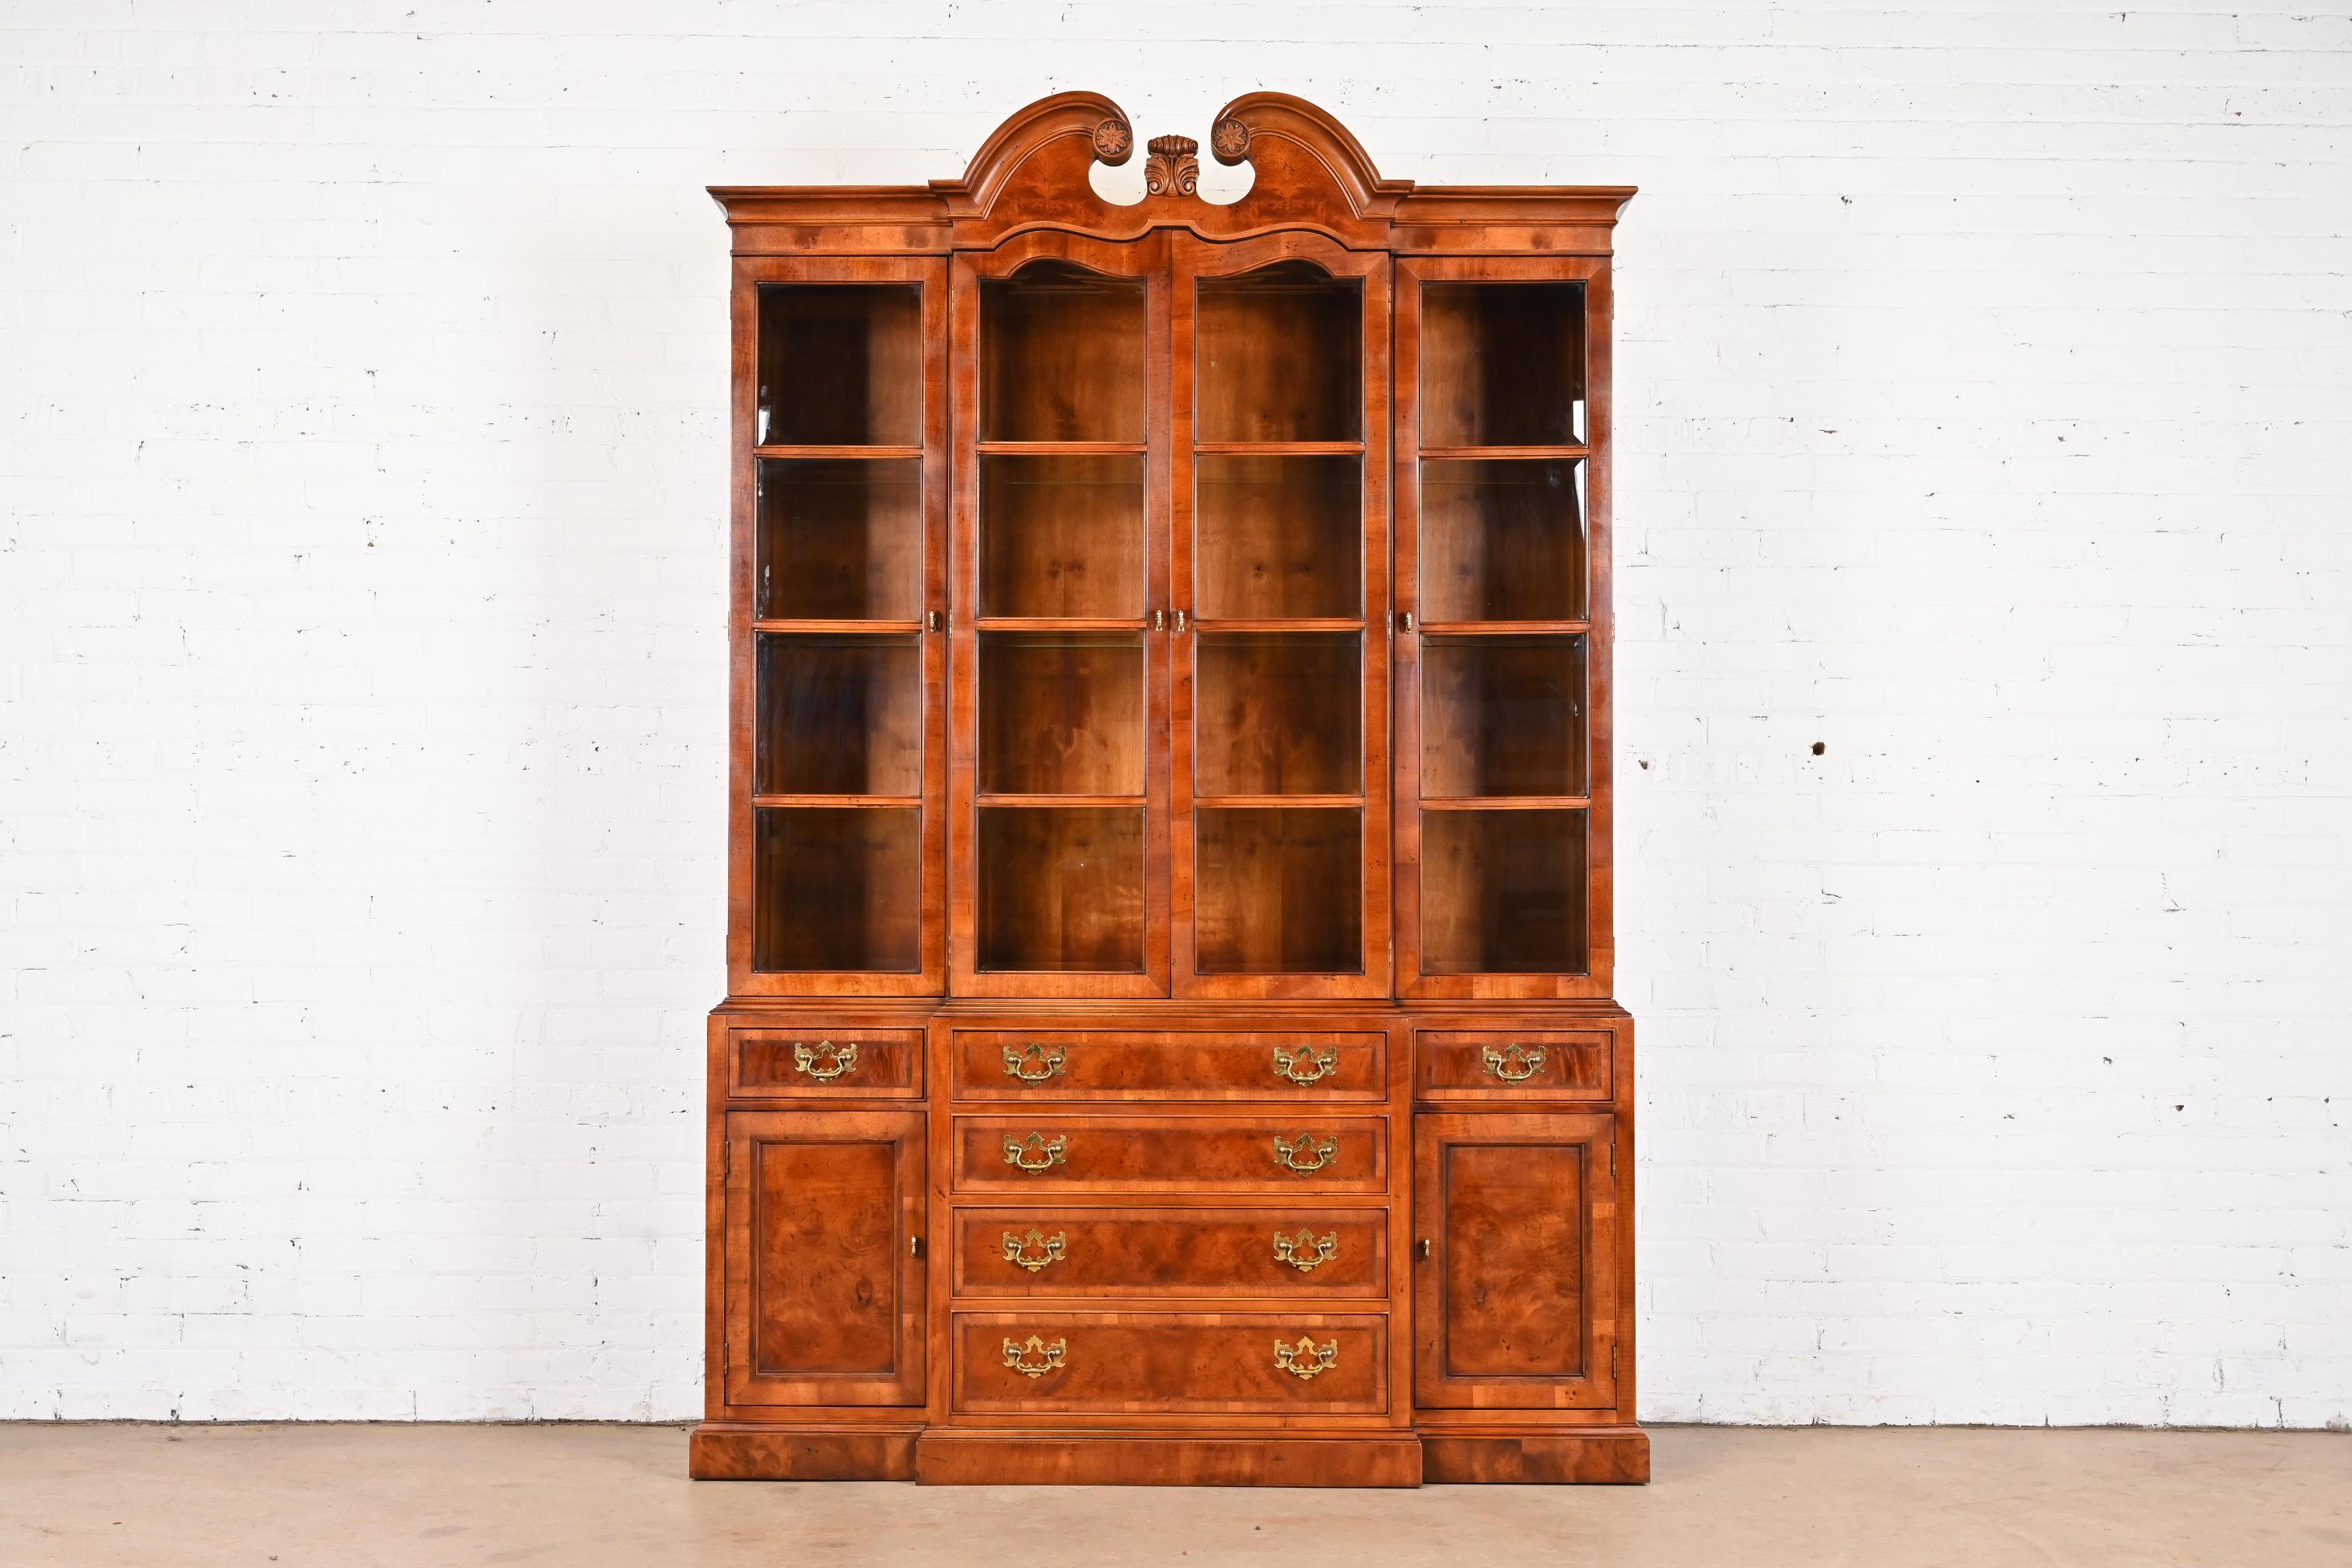 A gorgeous Georgian or Chippendale style lighted breakfront bookcase or dining cabinet

By Henredon, 